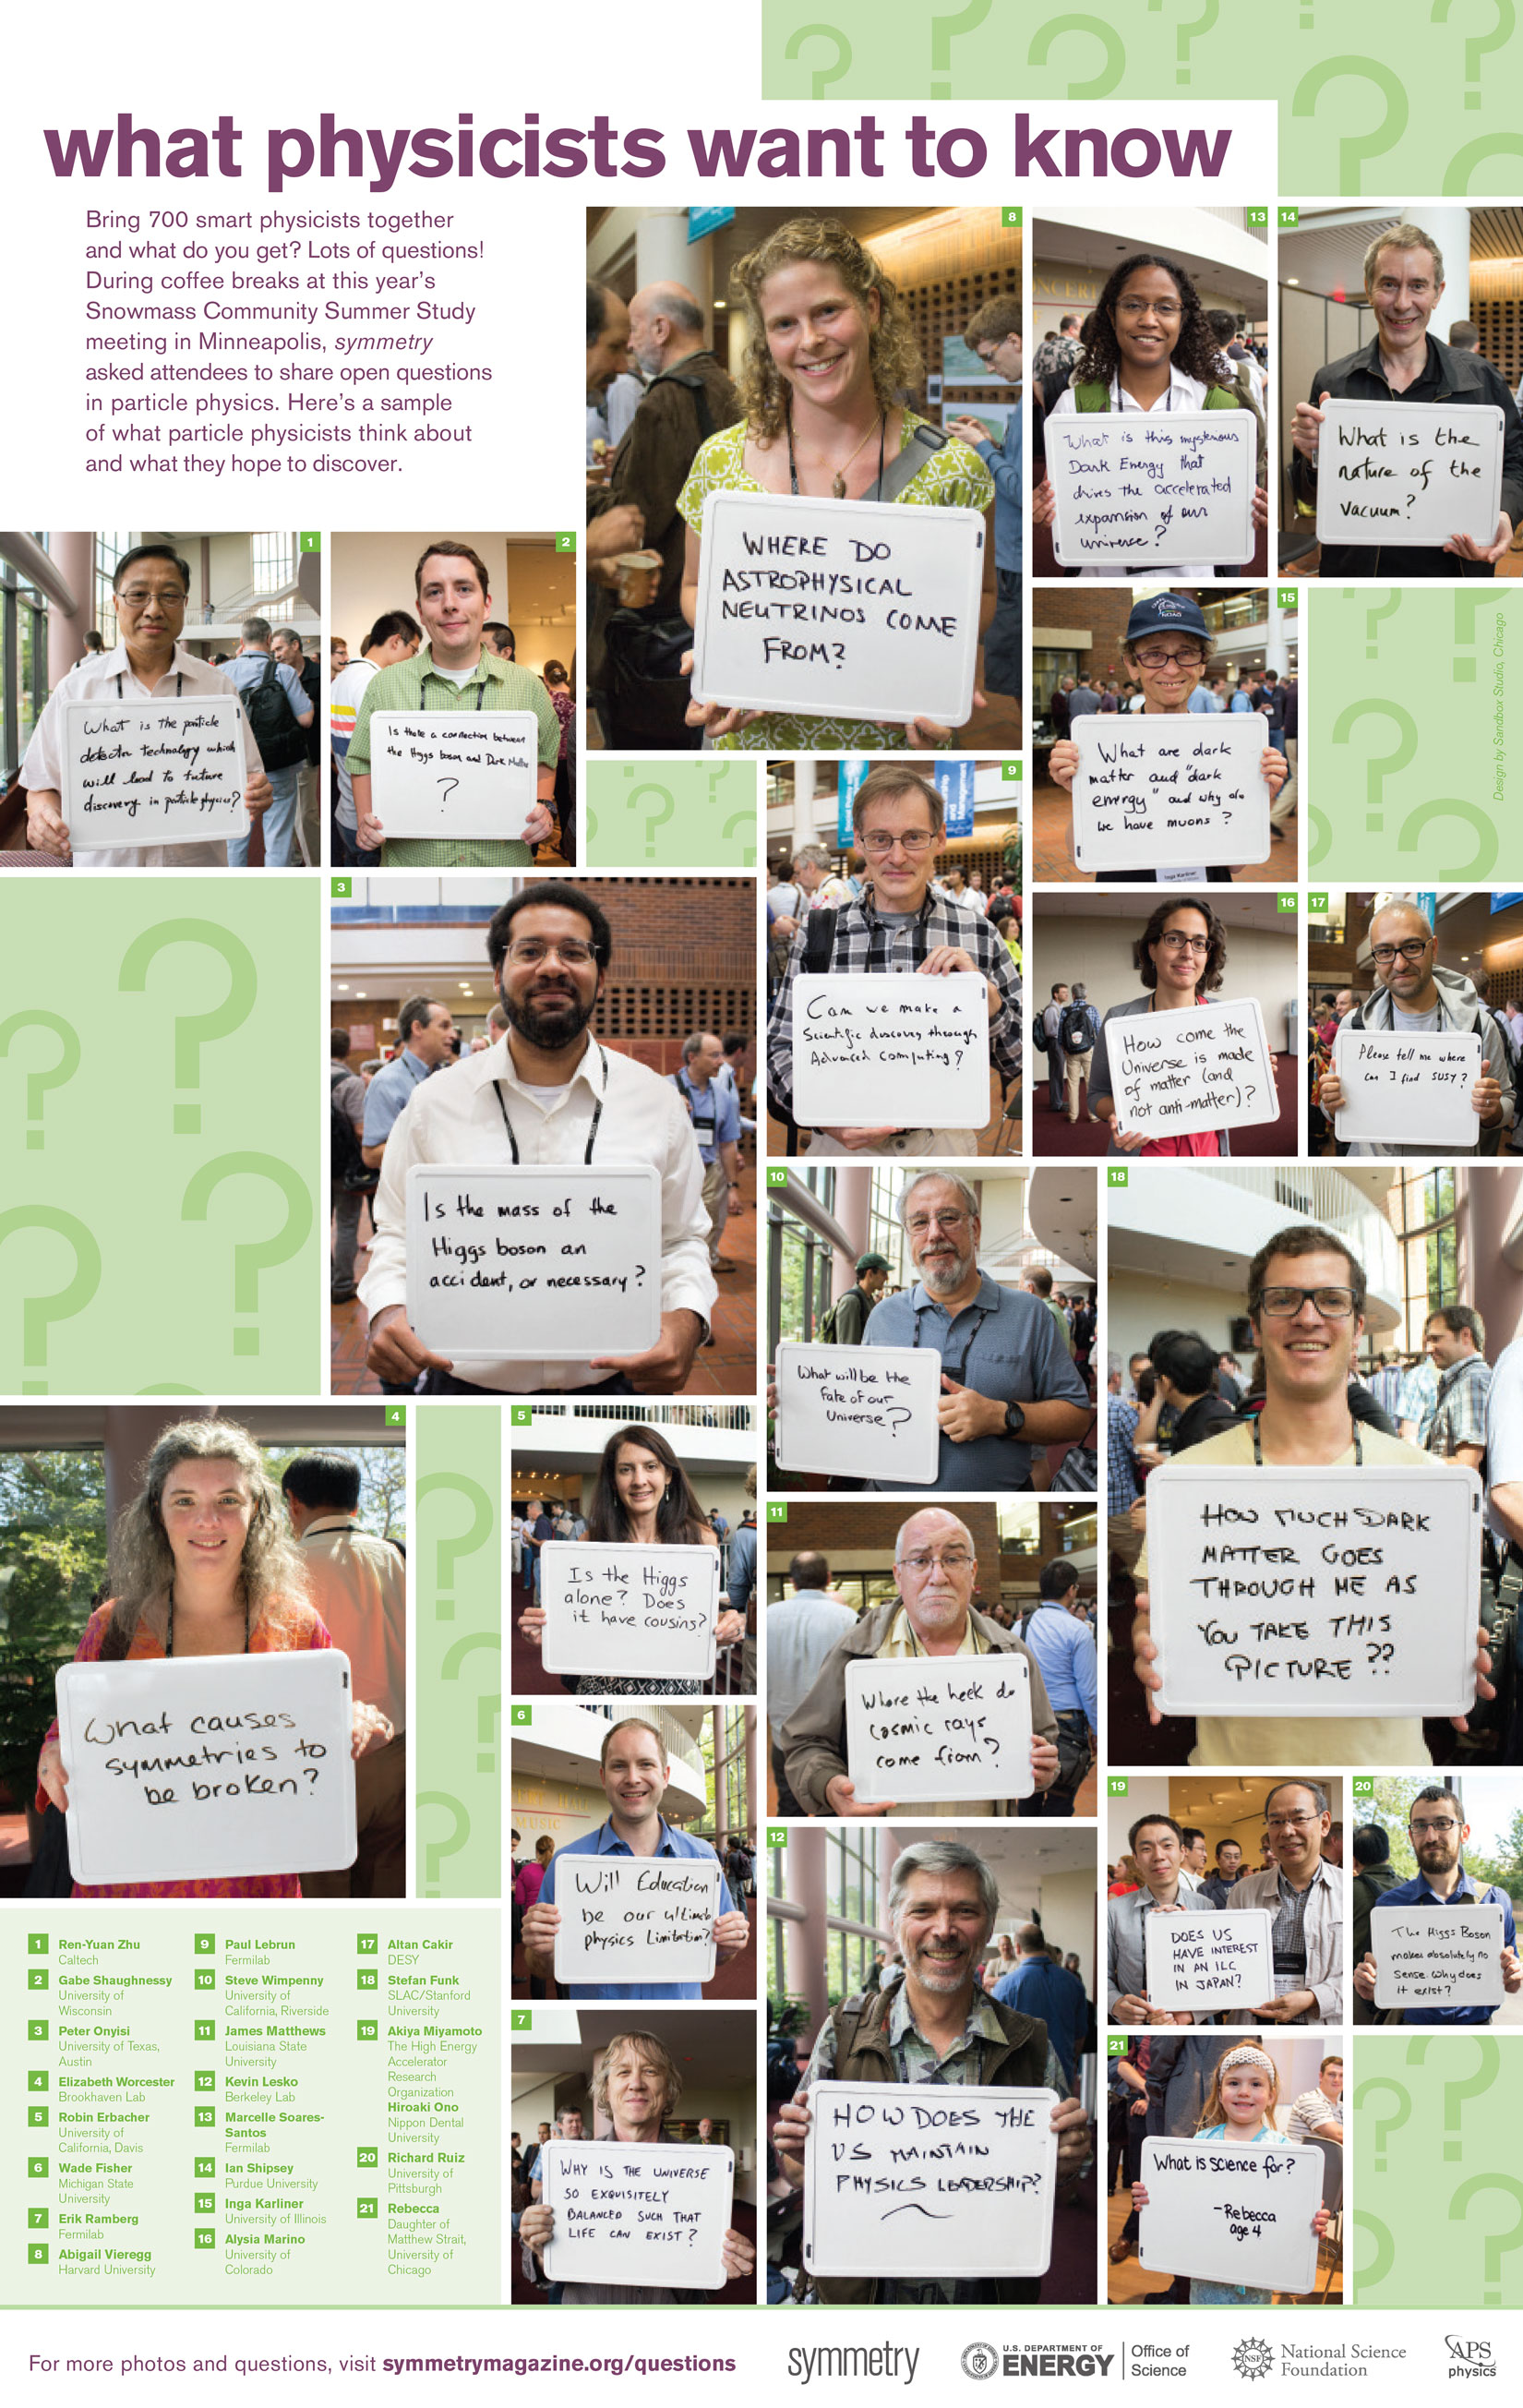 Photo of unanswered questions poster, people holding white boards with science questions on them